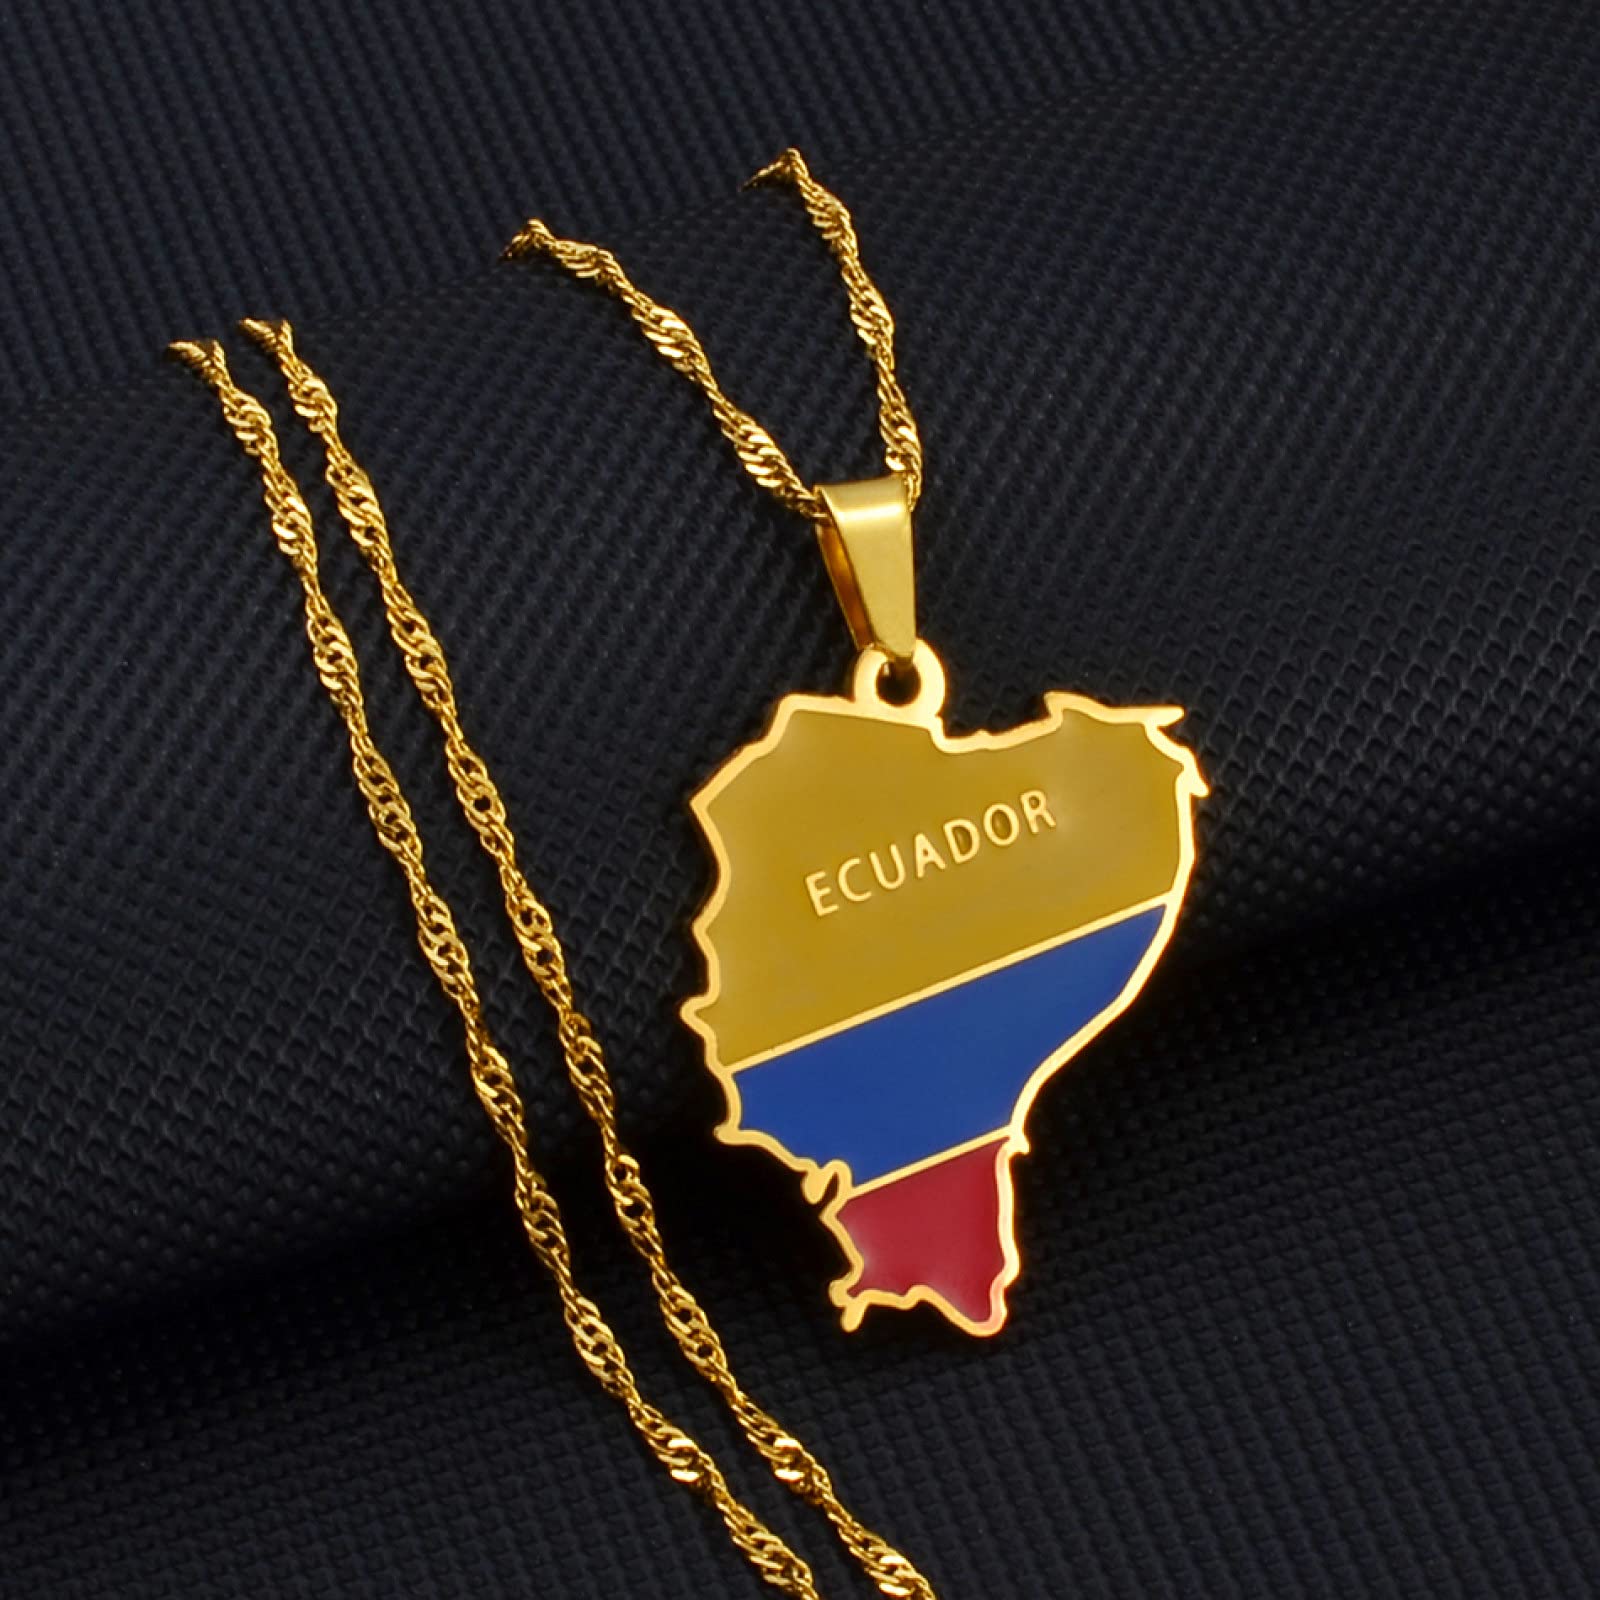 SHOUJIQQ Flag and Map of Ecuador Pendant Necklaces - Ethnic Hip Hop Country Maps Necklace for Women Men Charm Jewelry Clavic